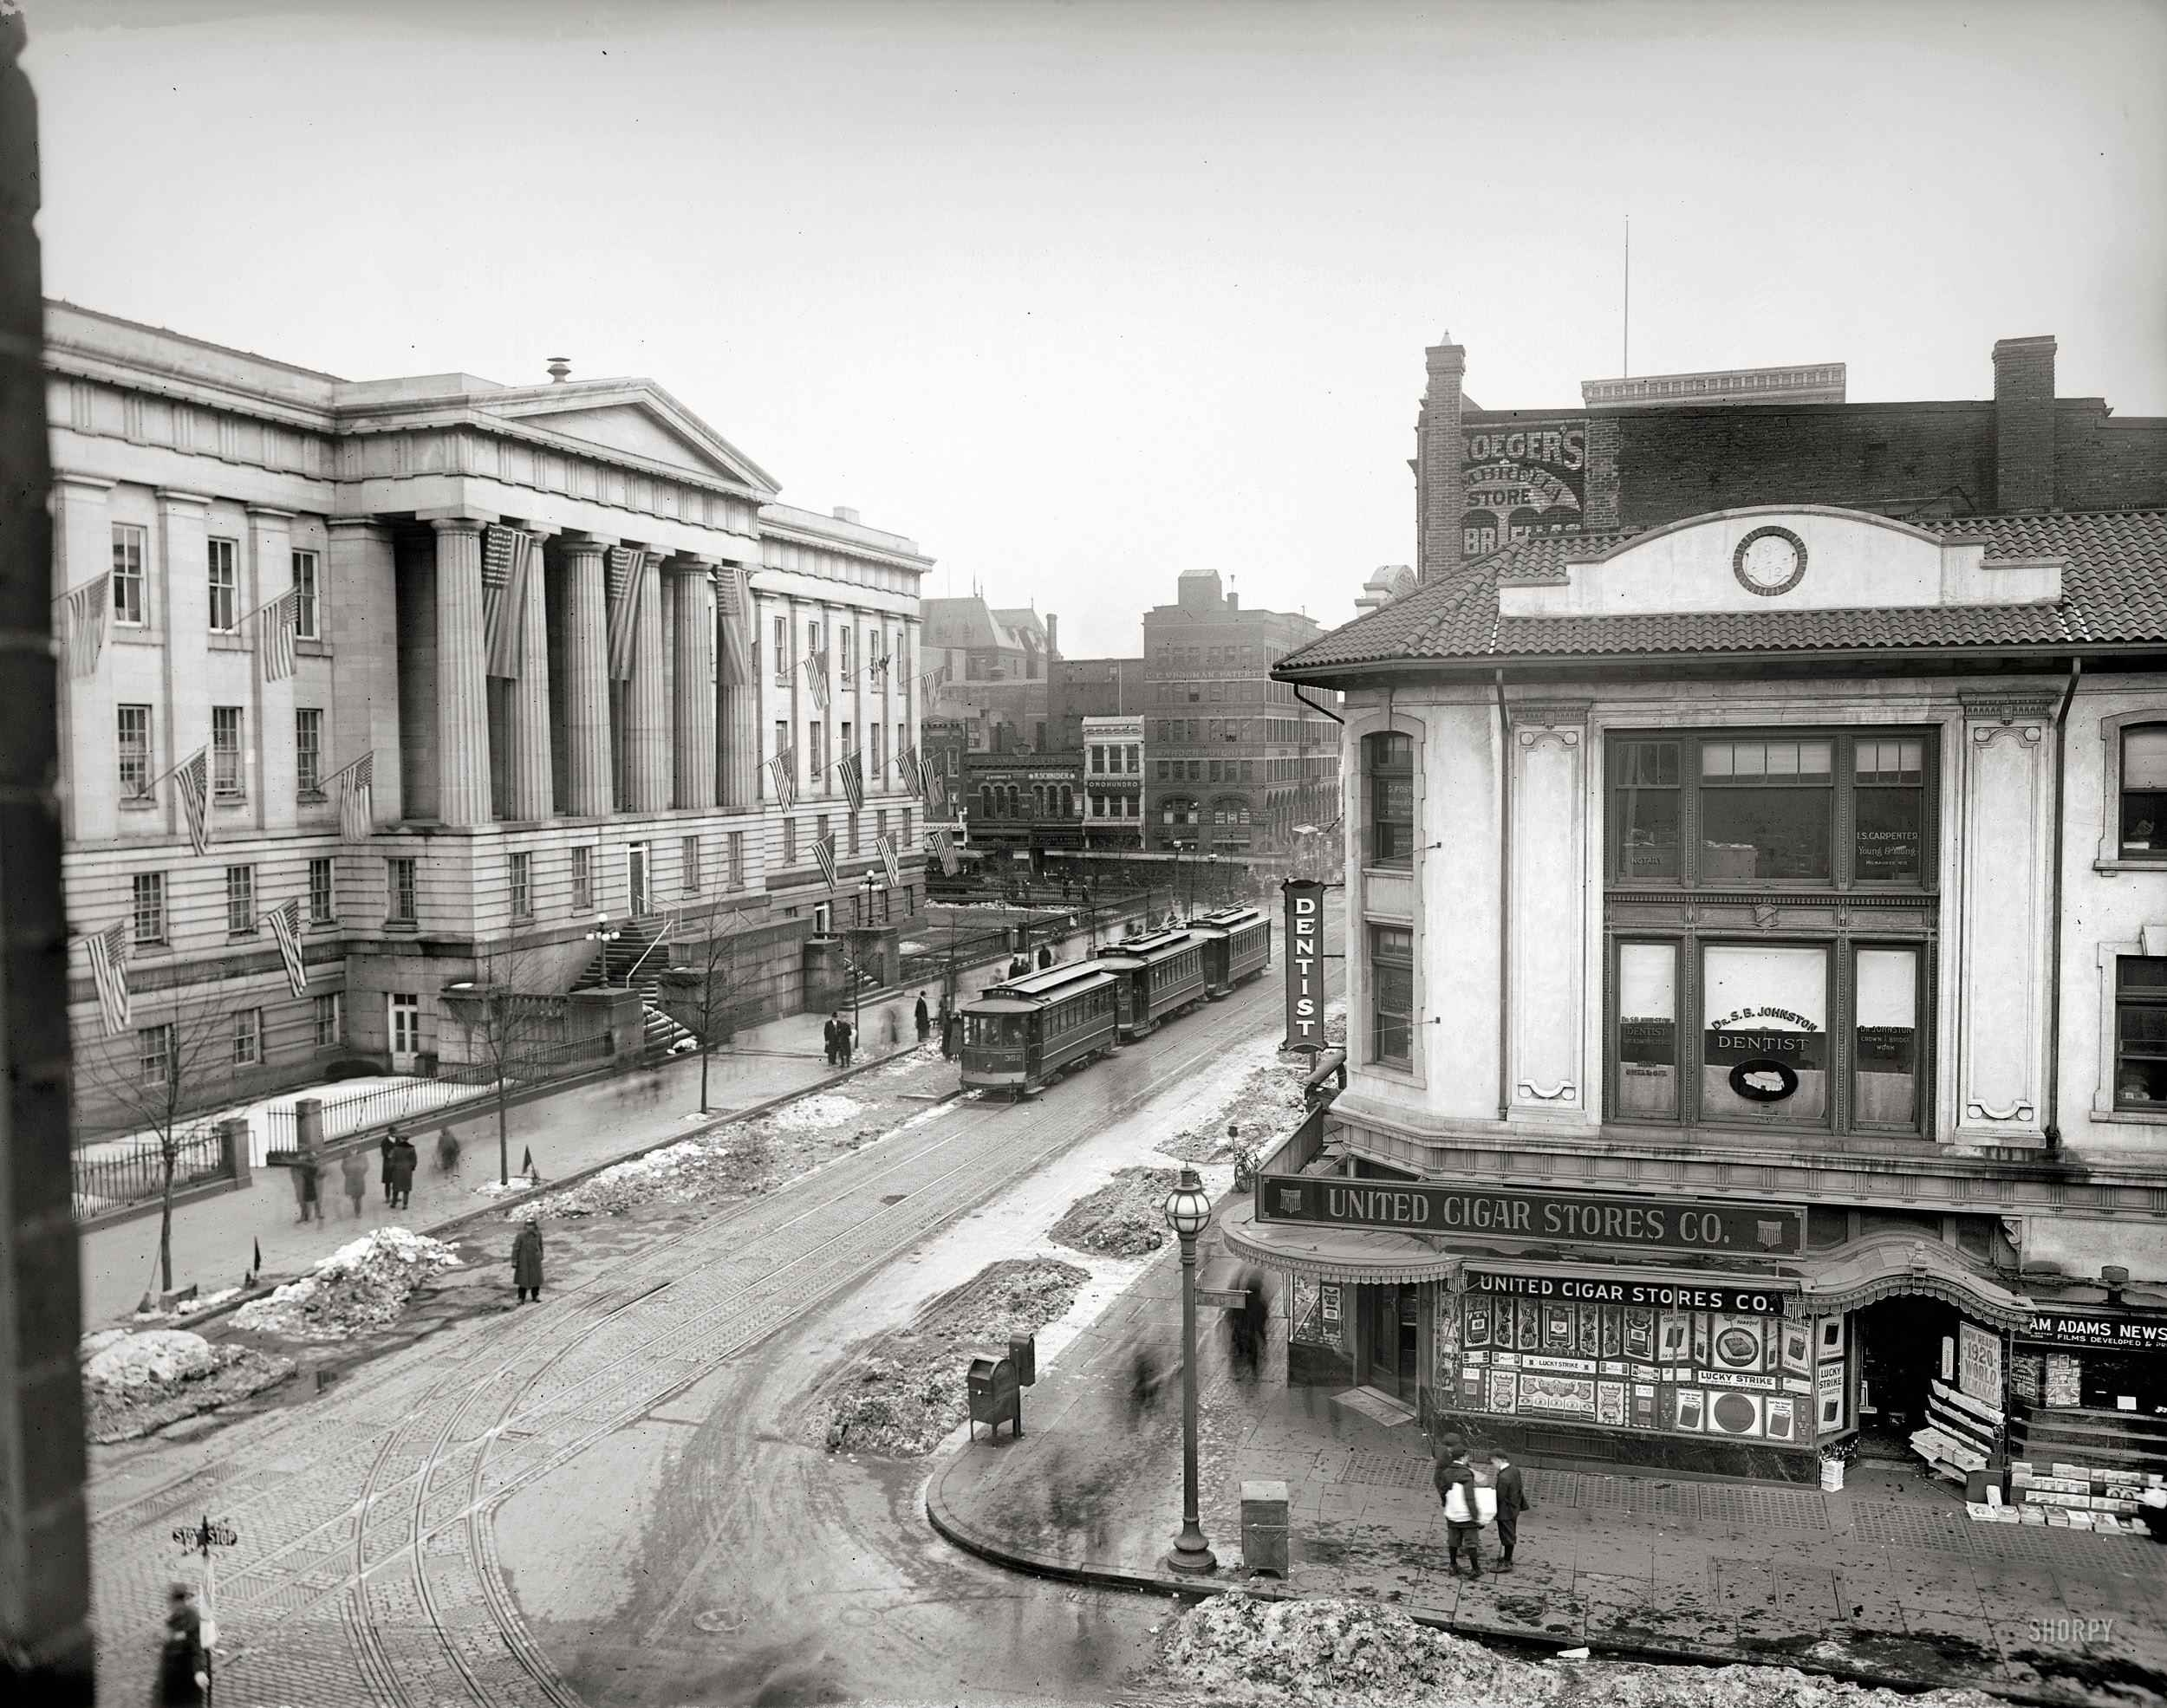 Washington, D.C., circa 1919. "Ninth and G Streets." With a view of the U.S. Patent Office. National Photo Co. Collection glass negative. View full size.